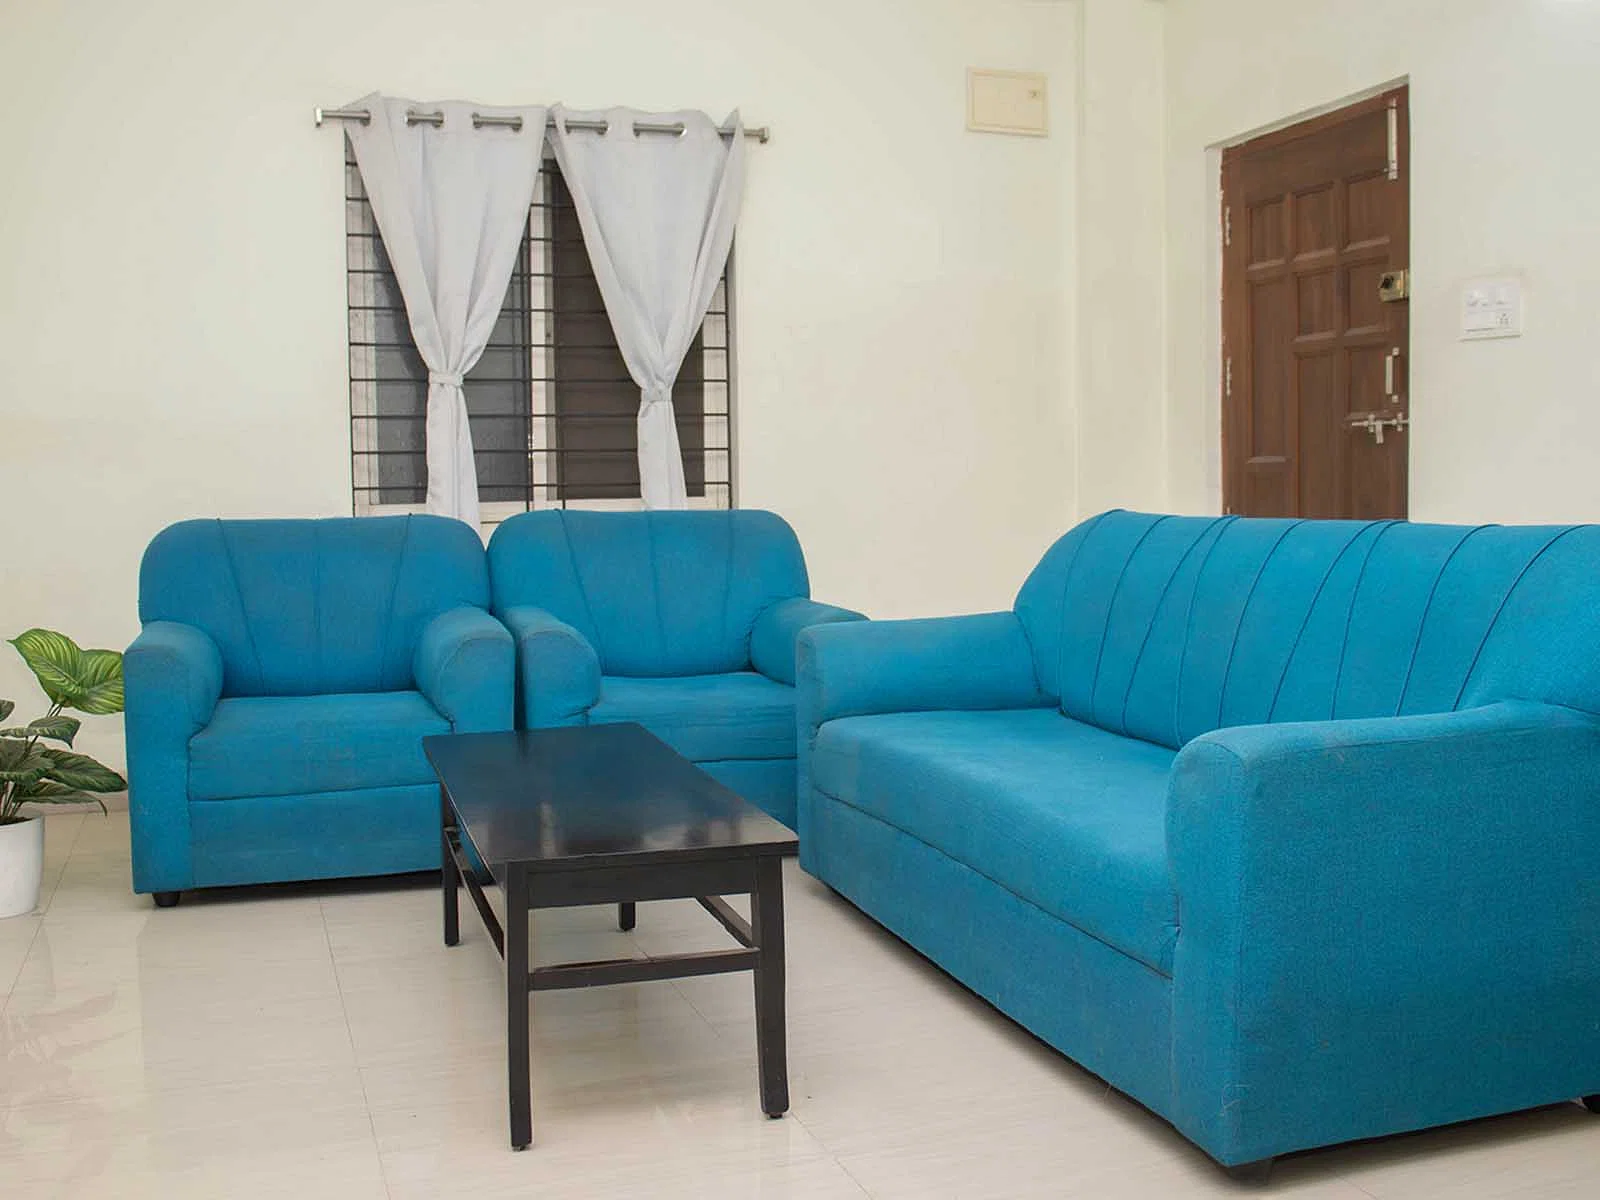 safe and affordable hostels for couple students with 24/7 security and CCTV surveillance-Zolo Grit